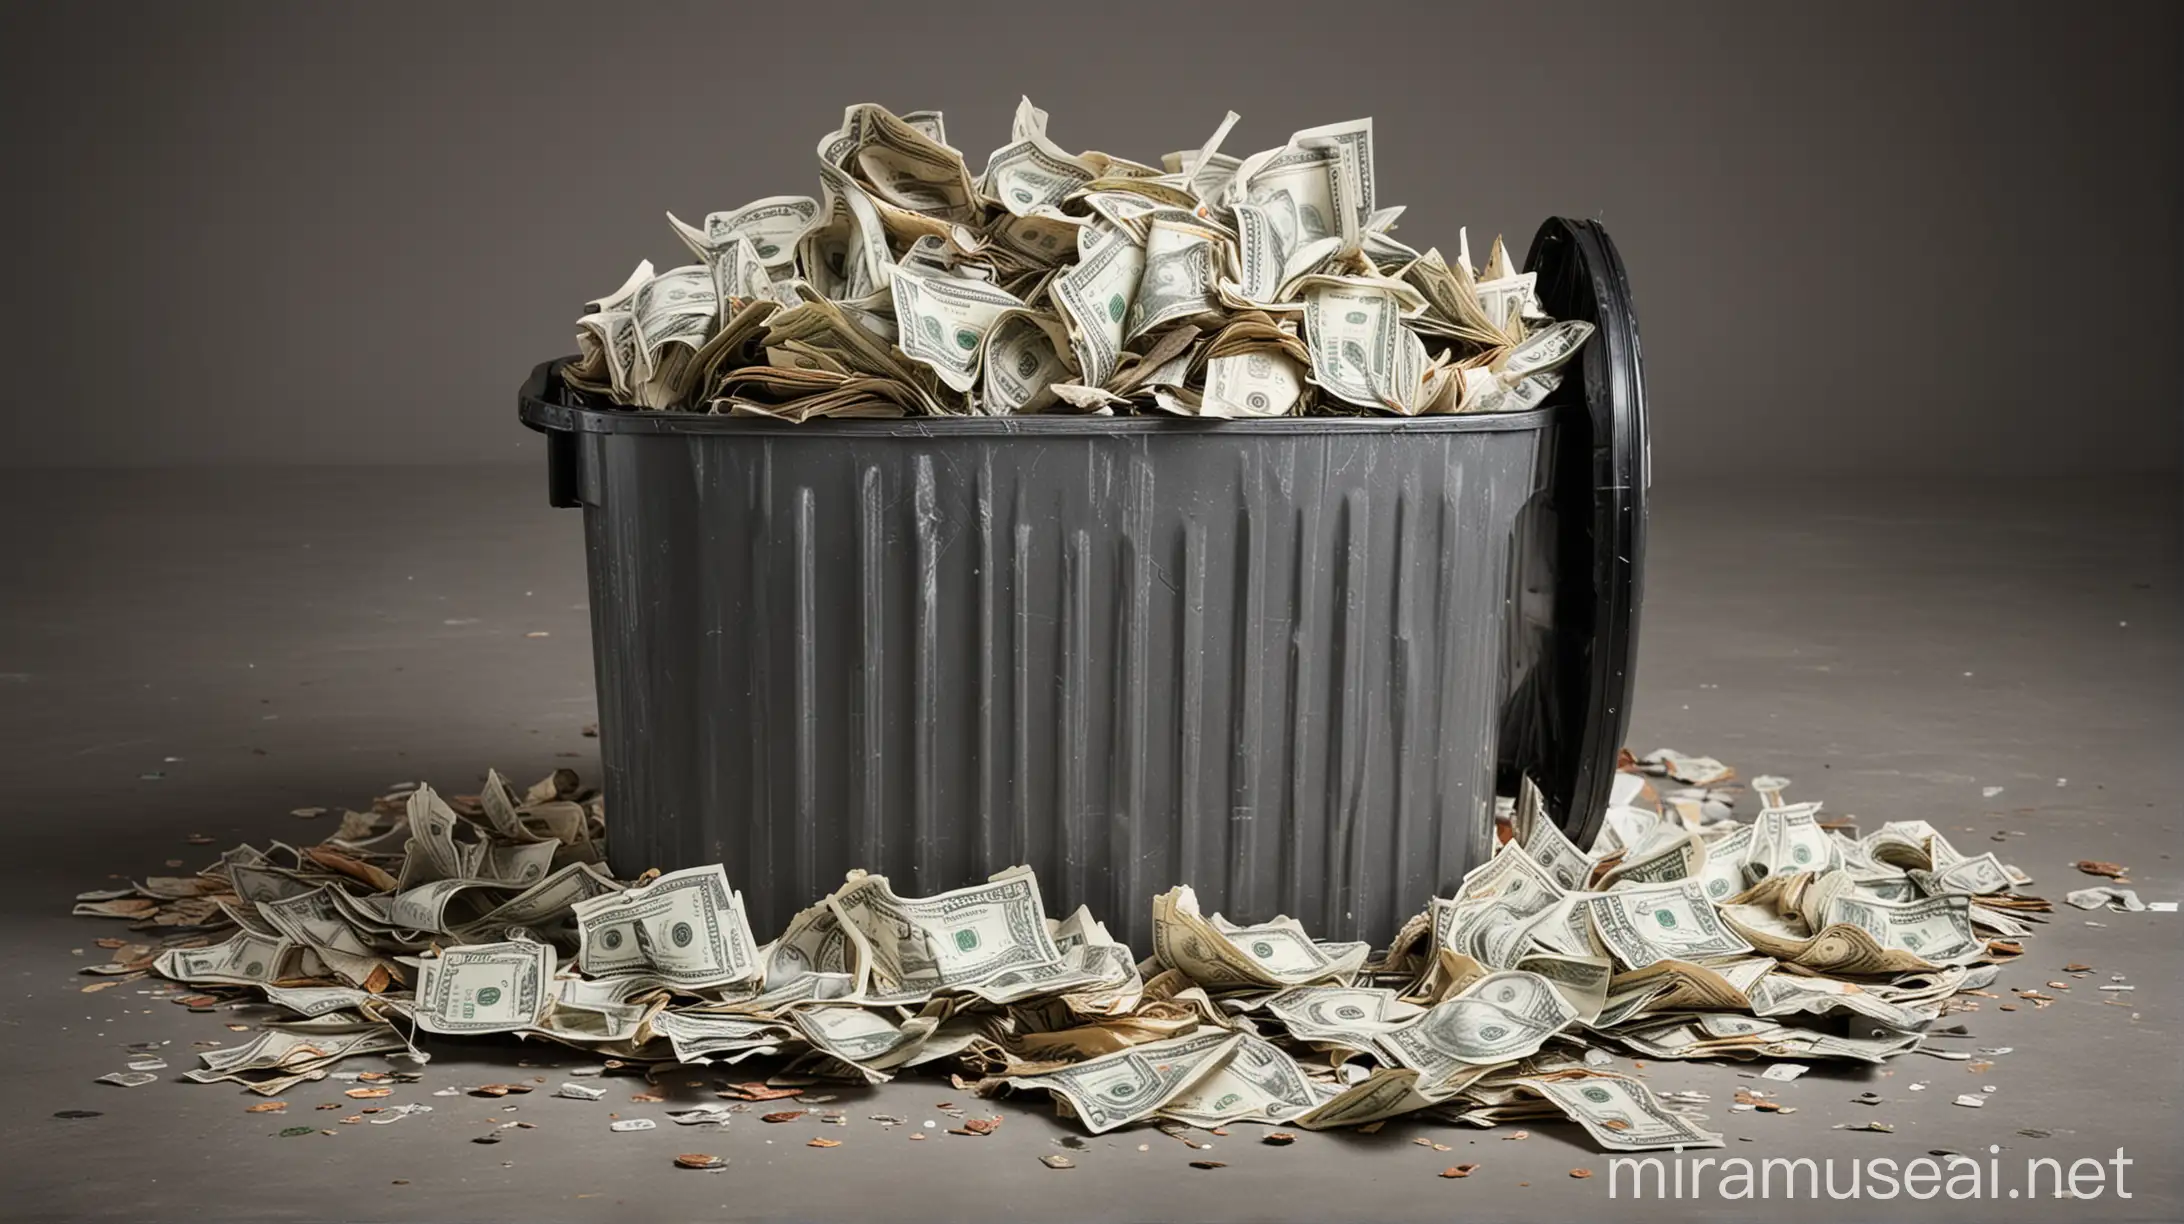 Trash Can Filled with Crumpled Discarded Money